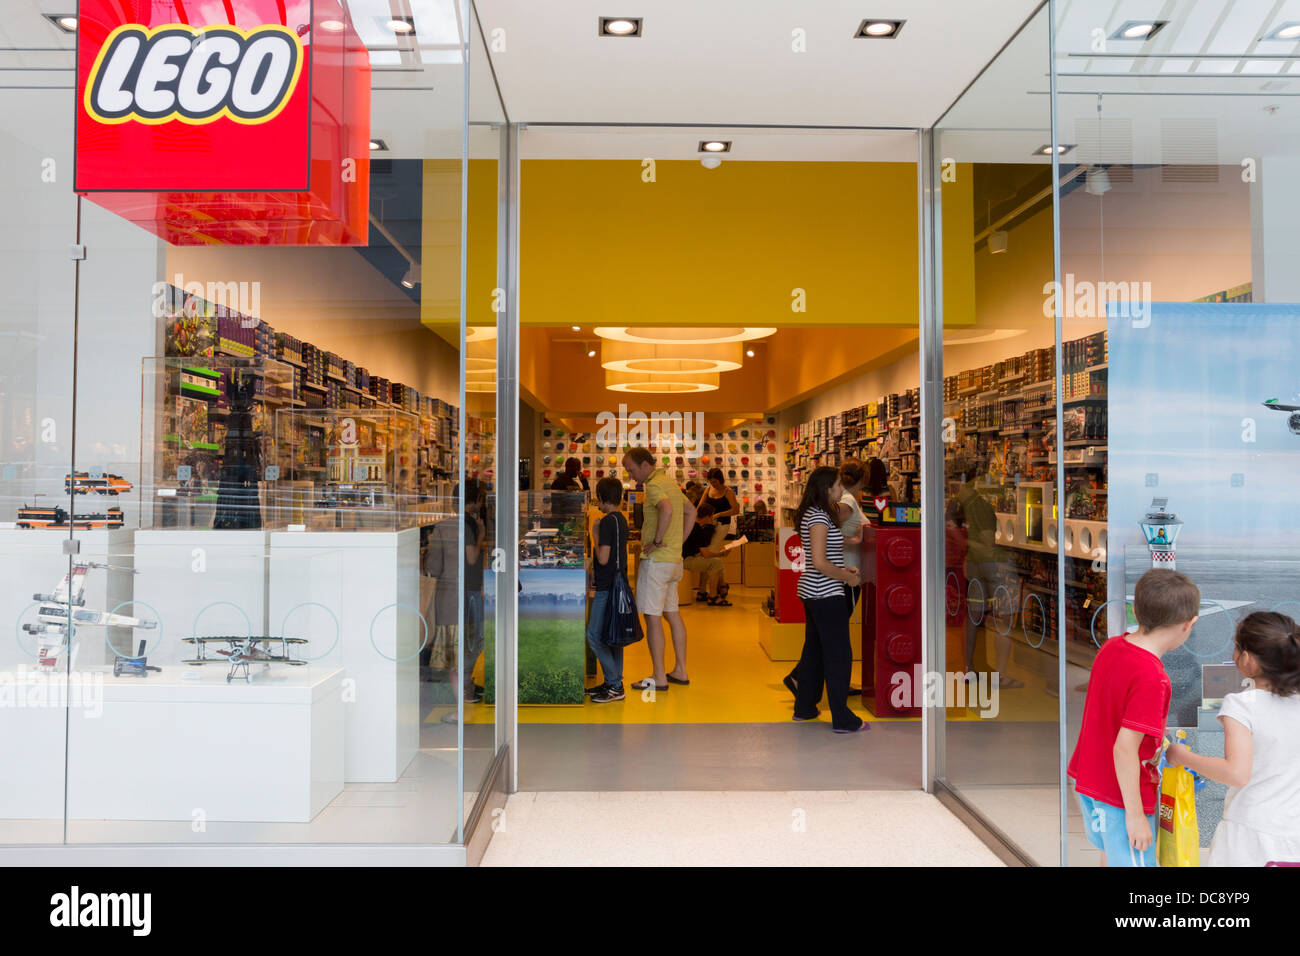 Magasin Lego - Intu Shopping Centre - Watford Banque D'Images